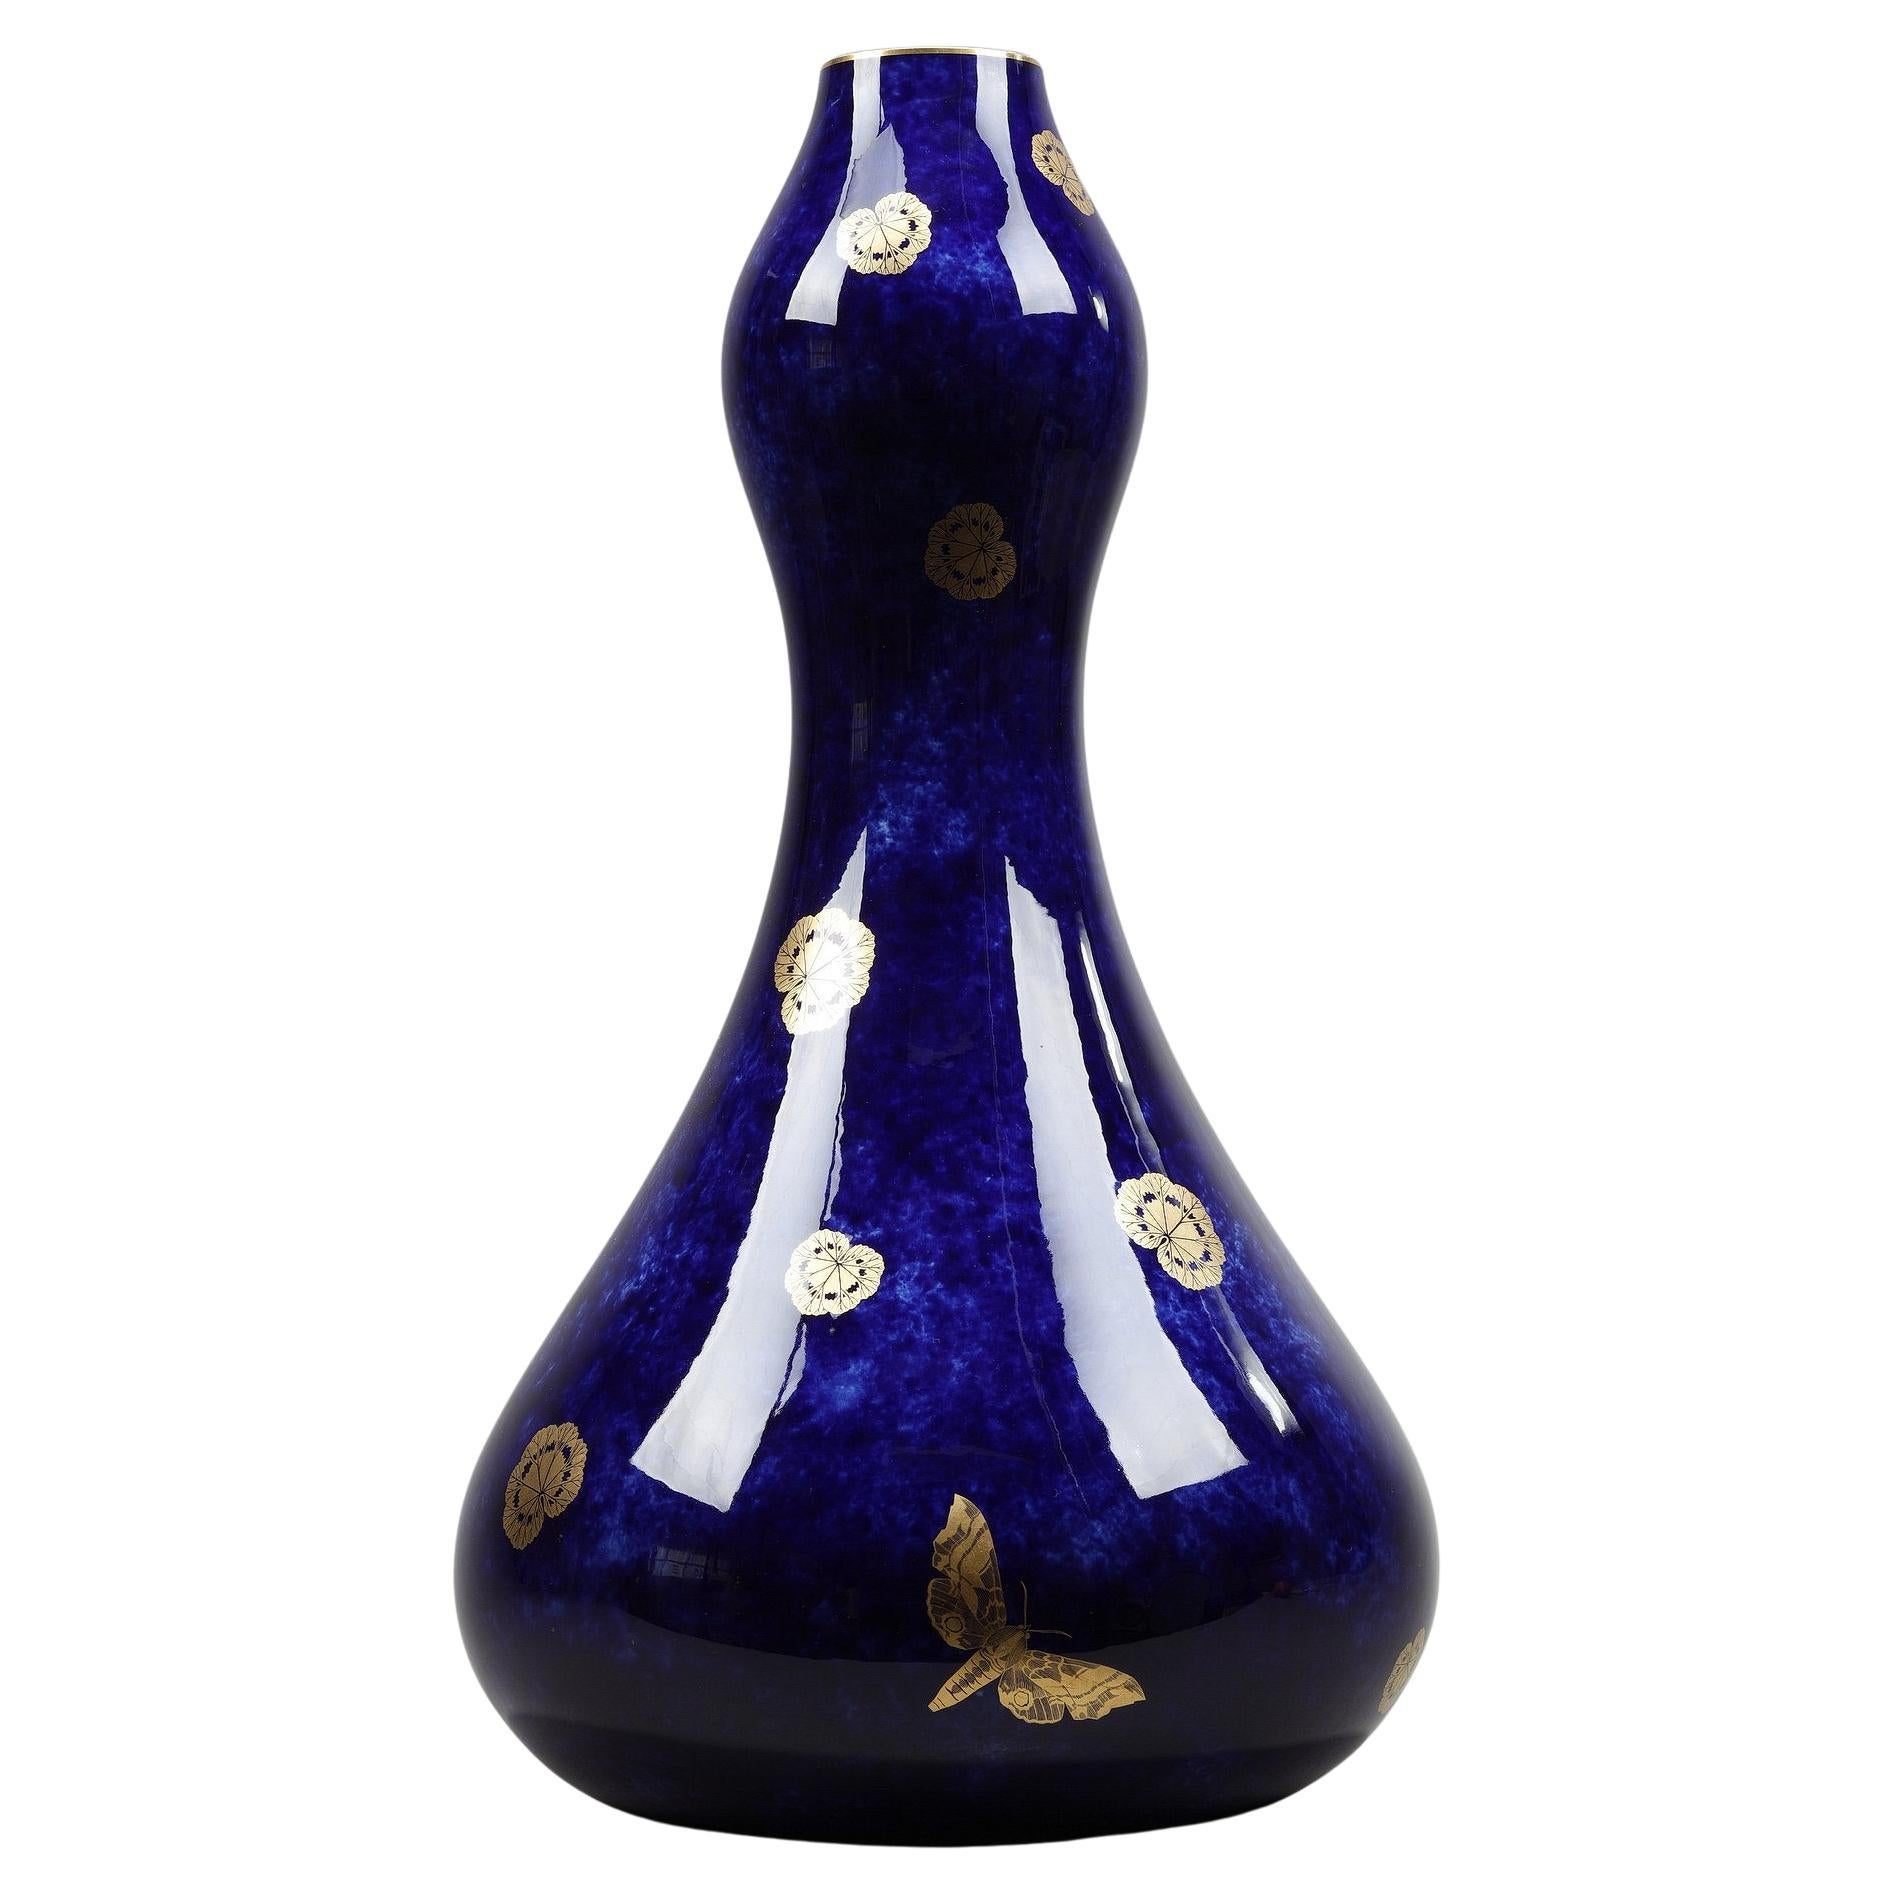 Blue vase from the Sevres Manufacture